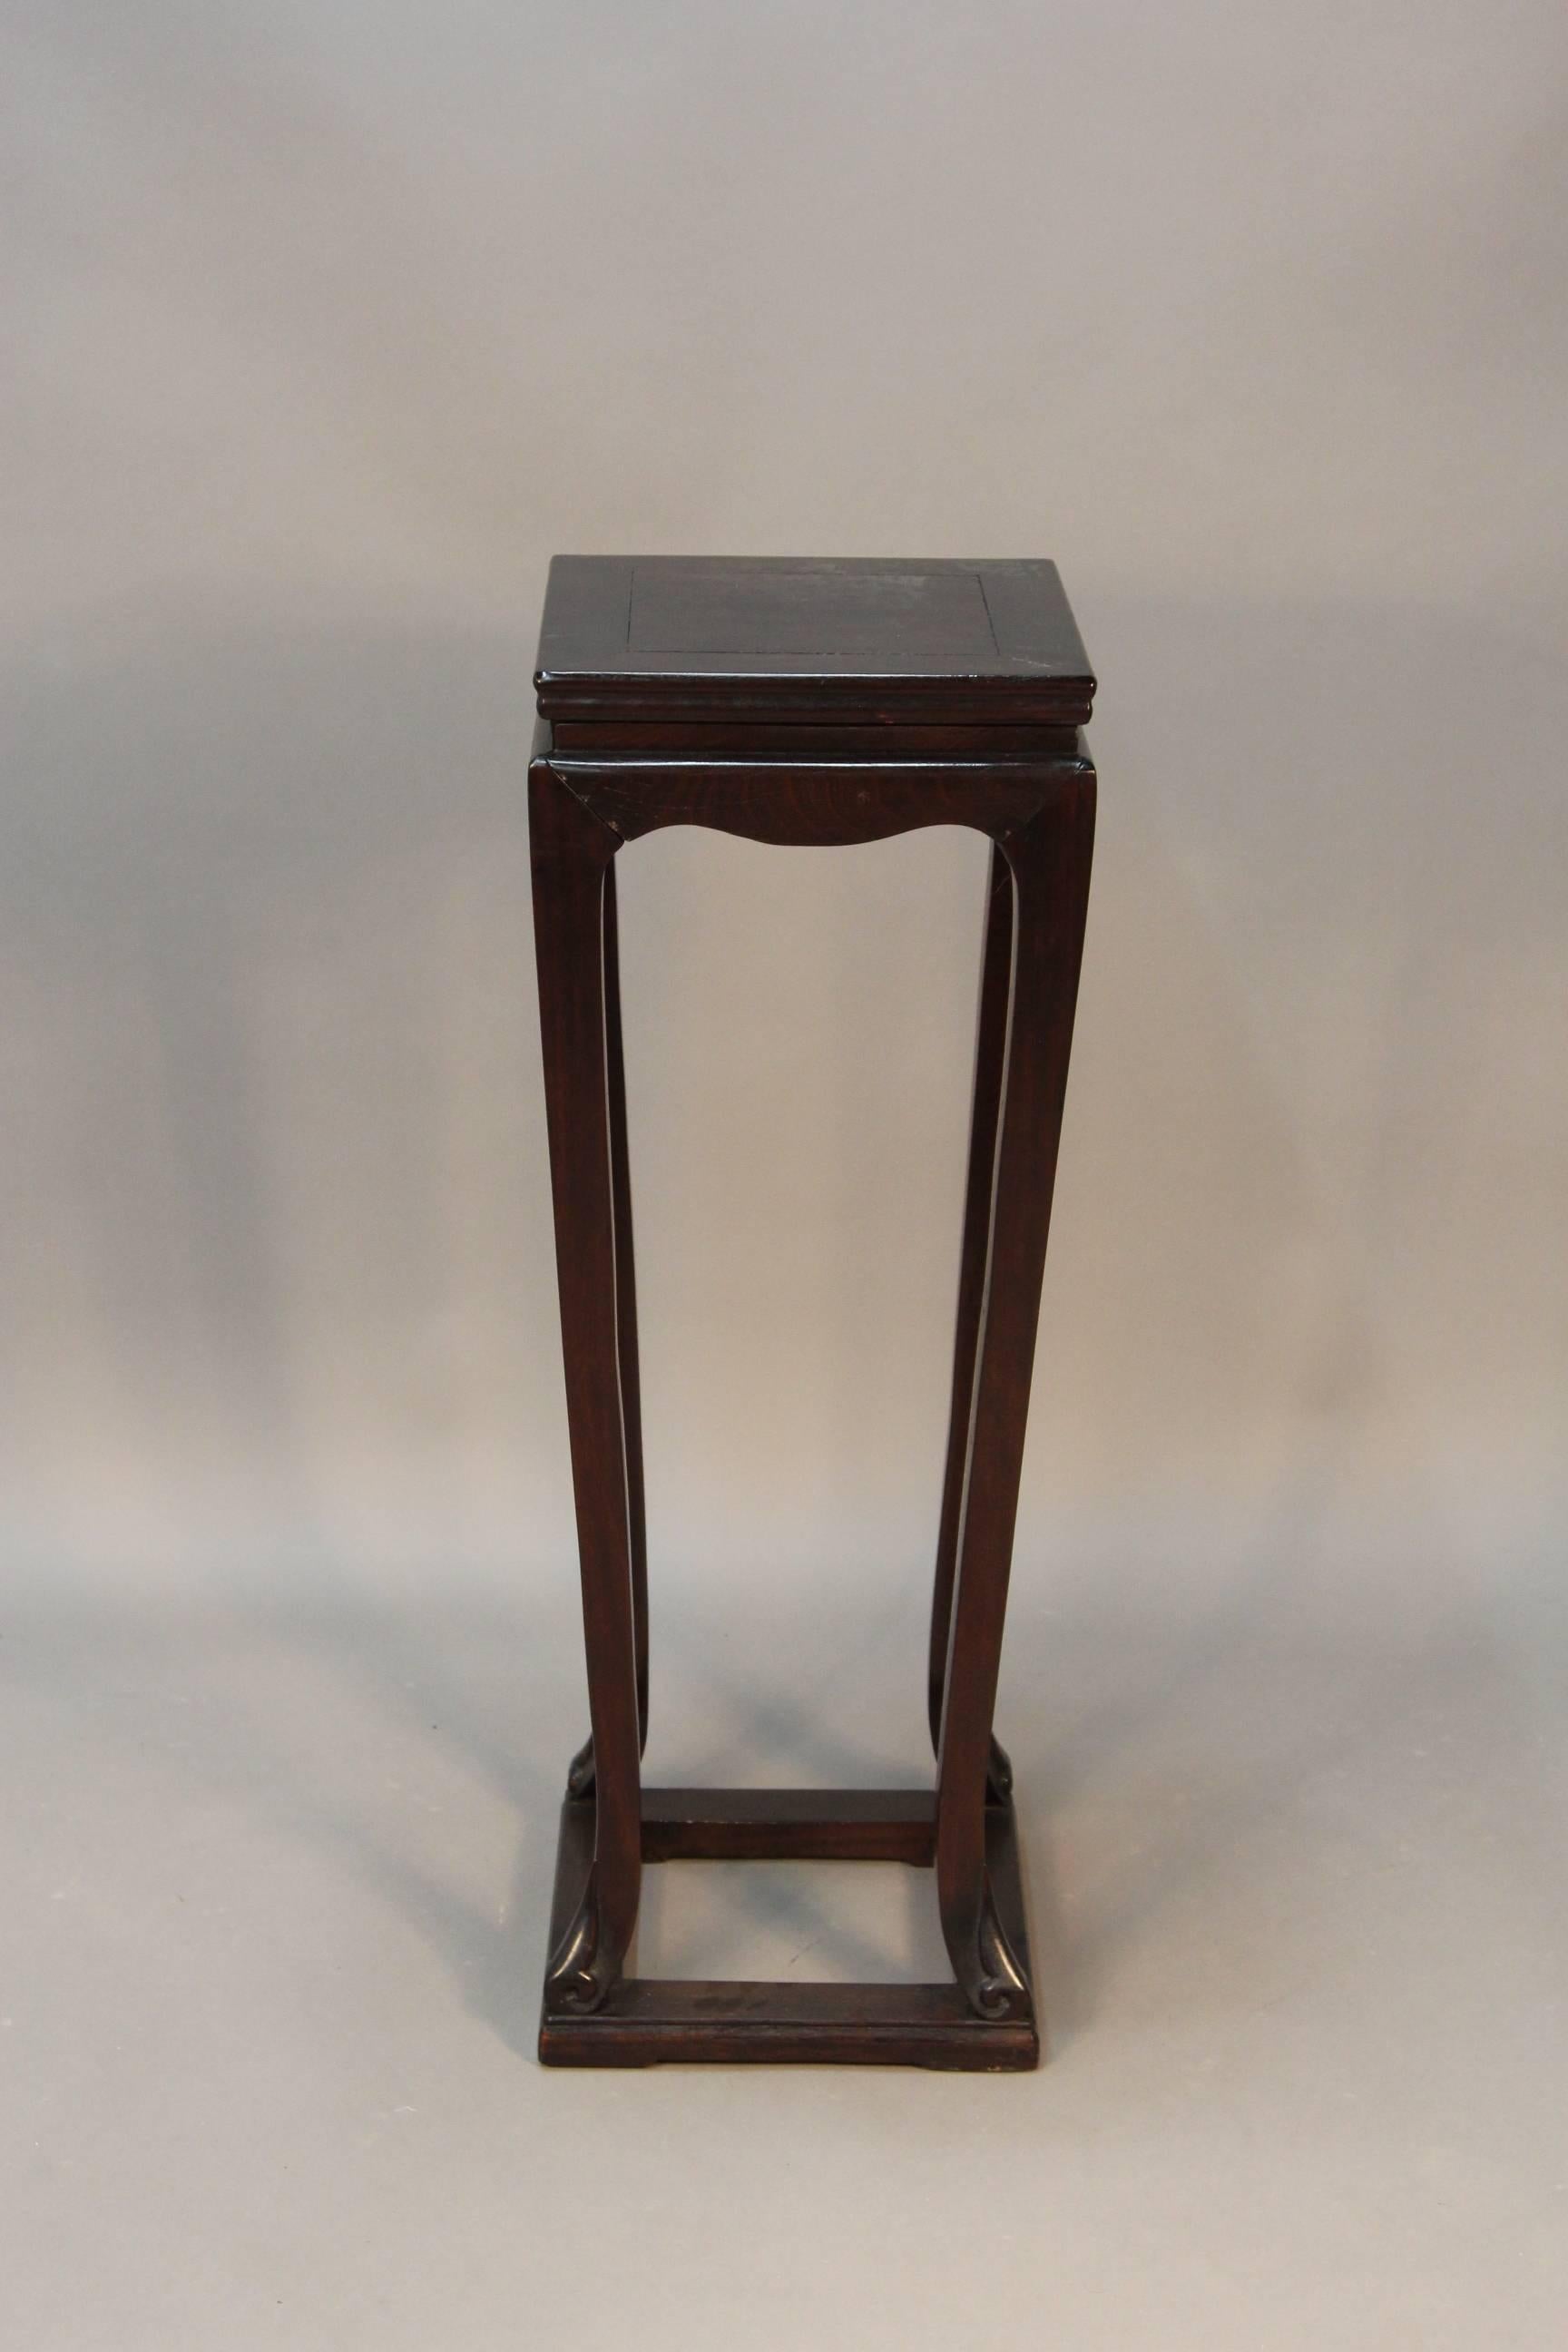 Pair of tall Chinese wood pedestals. These pedestals have a scalloped apron, tapered legs and scroll feet on a box form base, with square shaped tops and hidden drawer in top molding.

Very solid stand with good size tops to accommodate a large